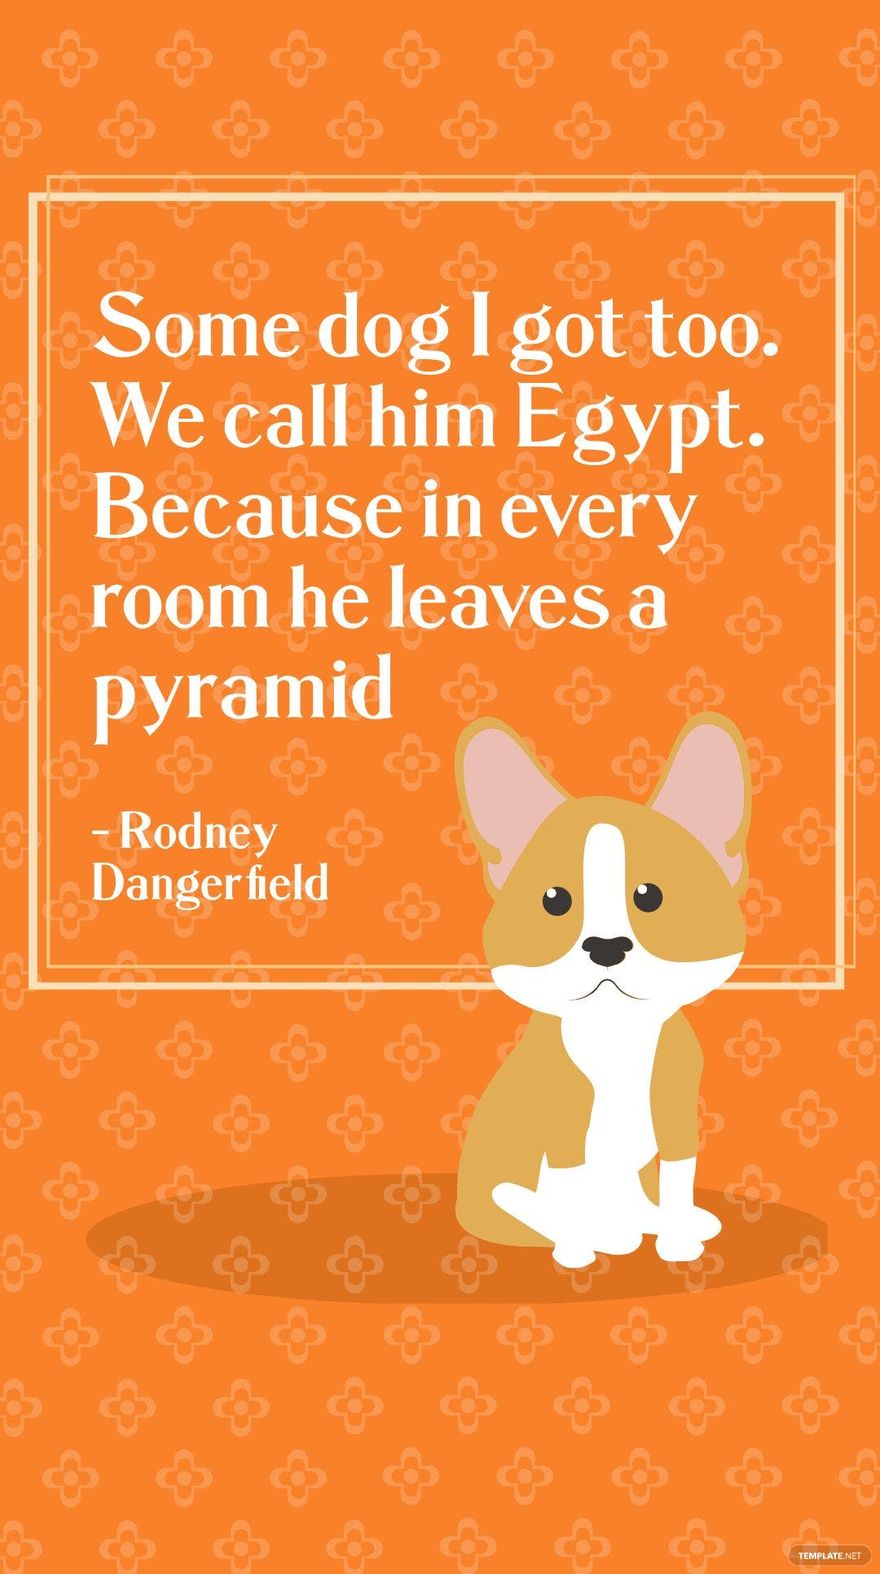 Rodney Dangerfield - Some dog I got too. We call him Egypt. Because in every room he leaves a pyramid